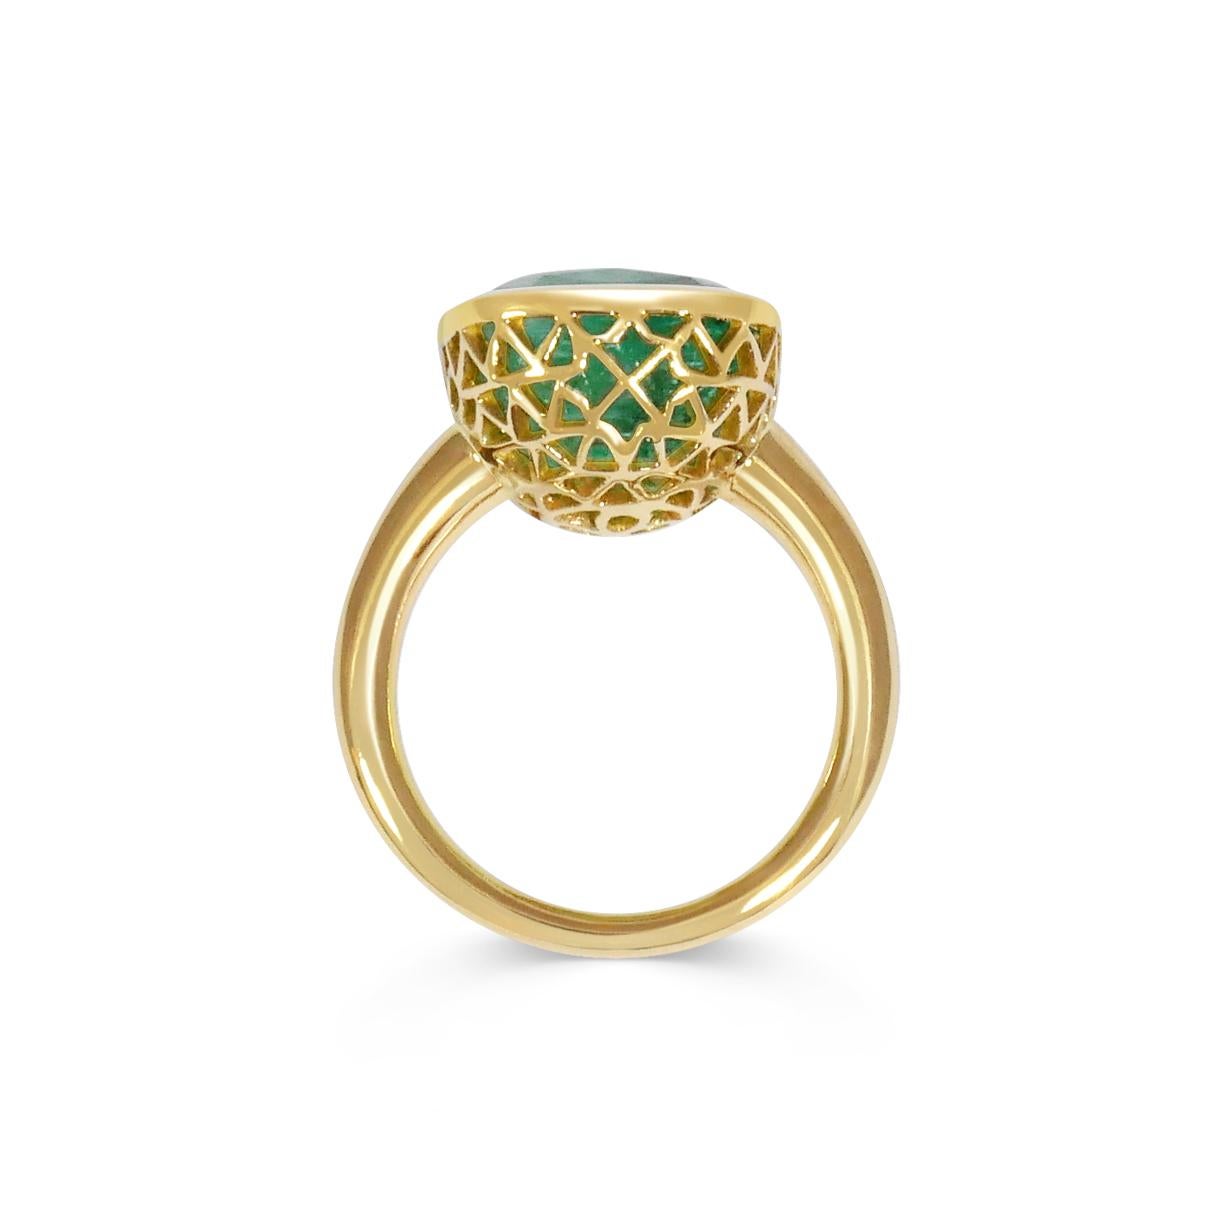 Handcrafted Cushion Cut 9.39 Carats Emerald 18 Karat Yellow Gold Cocktail Ring. Our expert craftsmen hand pierce our iconic gold lace to fit each stone on a tapered band making each ring One of a Kind. This unique technique, inspired by our